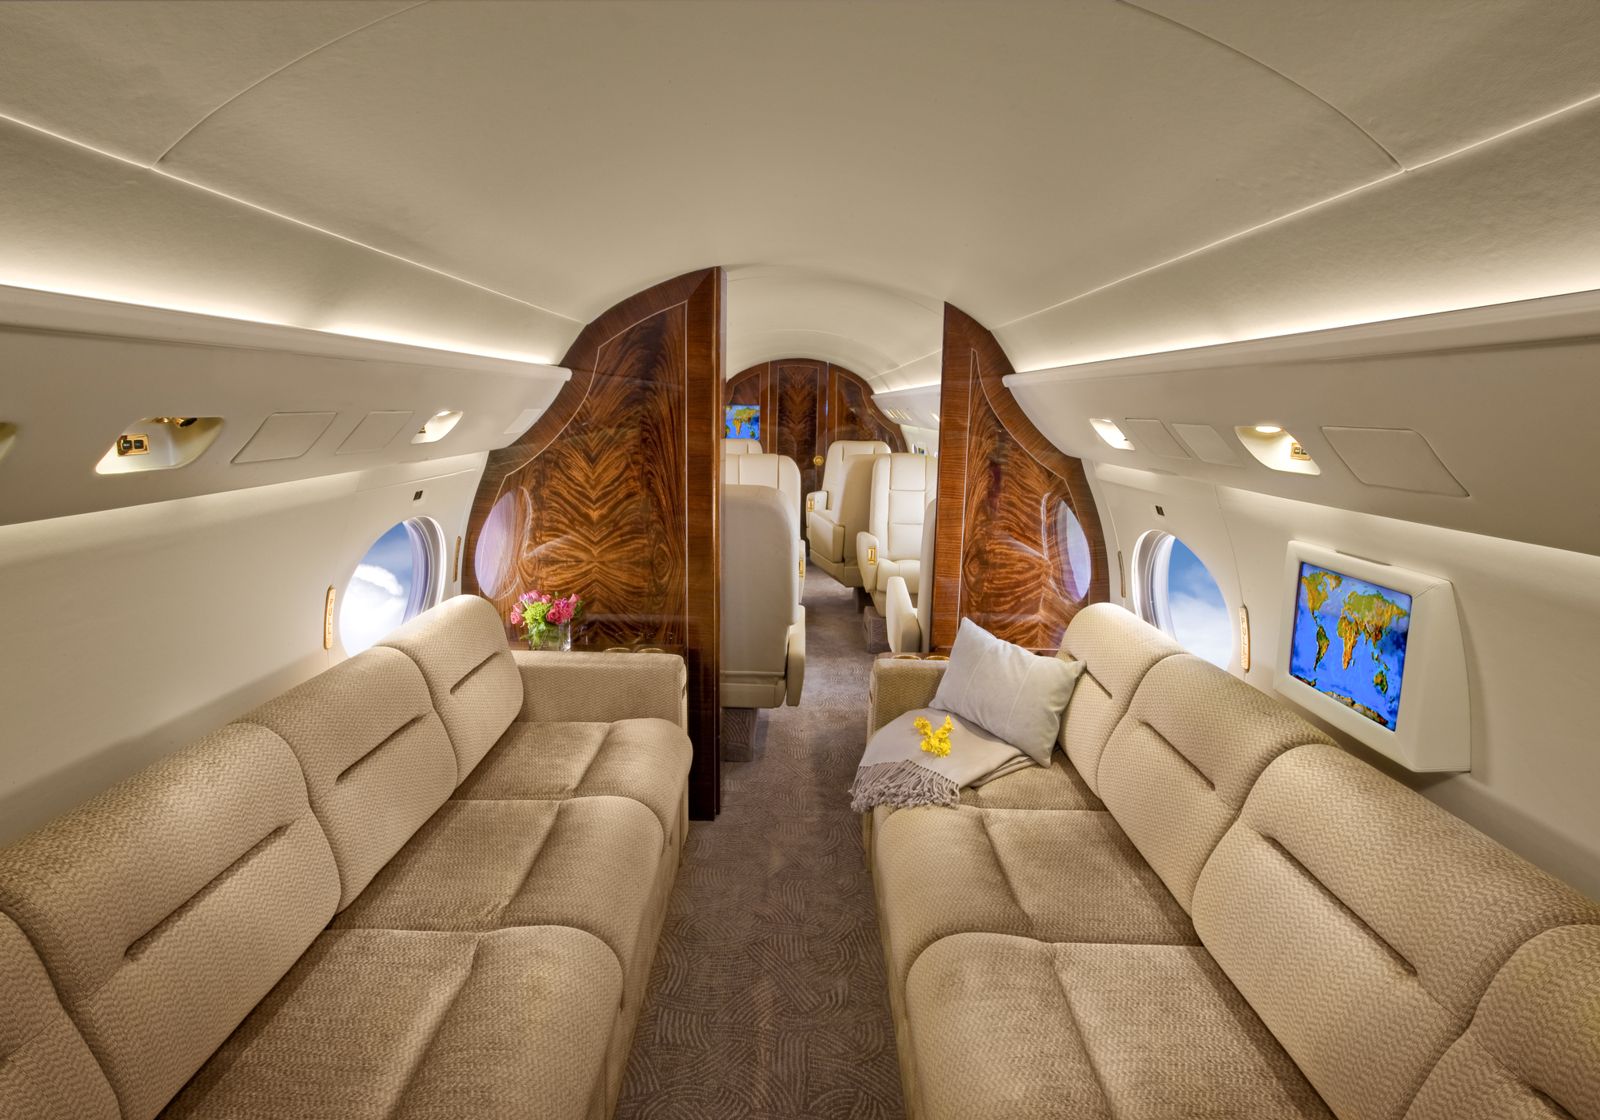 Gulfstream GIV  S/N 1114 for sale | gallery image: /userfiles/images/GIV_SN1114/trans-exec-g4-n763db-27.jpg